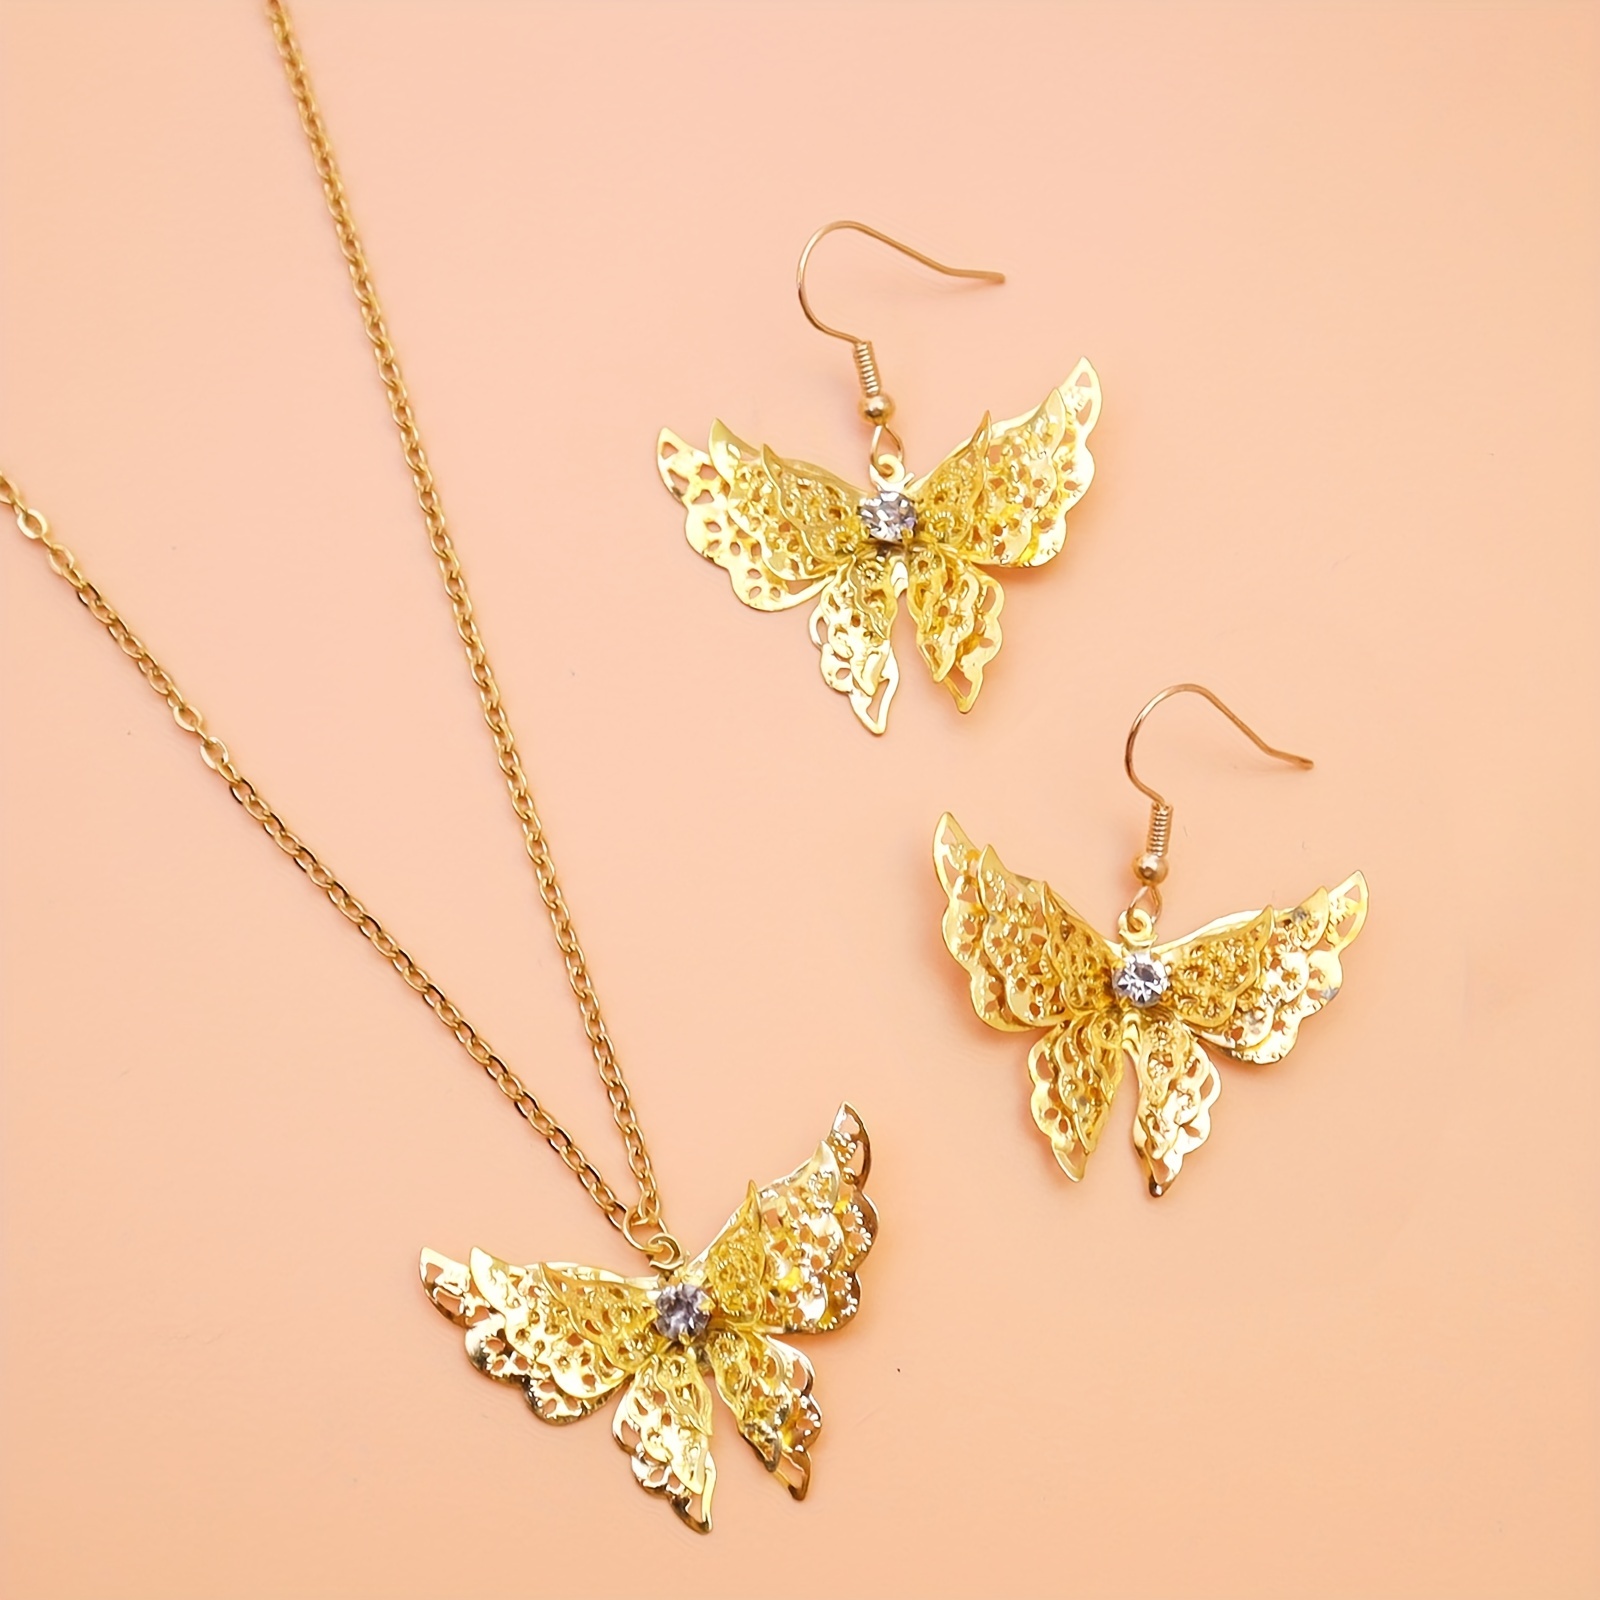 1pair Of Gold-color Blossom Shaped & Butterfly Shaped Hollow Out Stainless  Steel Handmade Earrings For Women, Suitable For Evening Party, Banquet,  Family Gathering And Honeymoon.